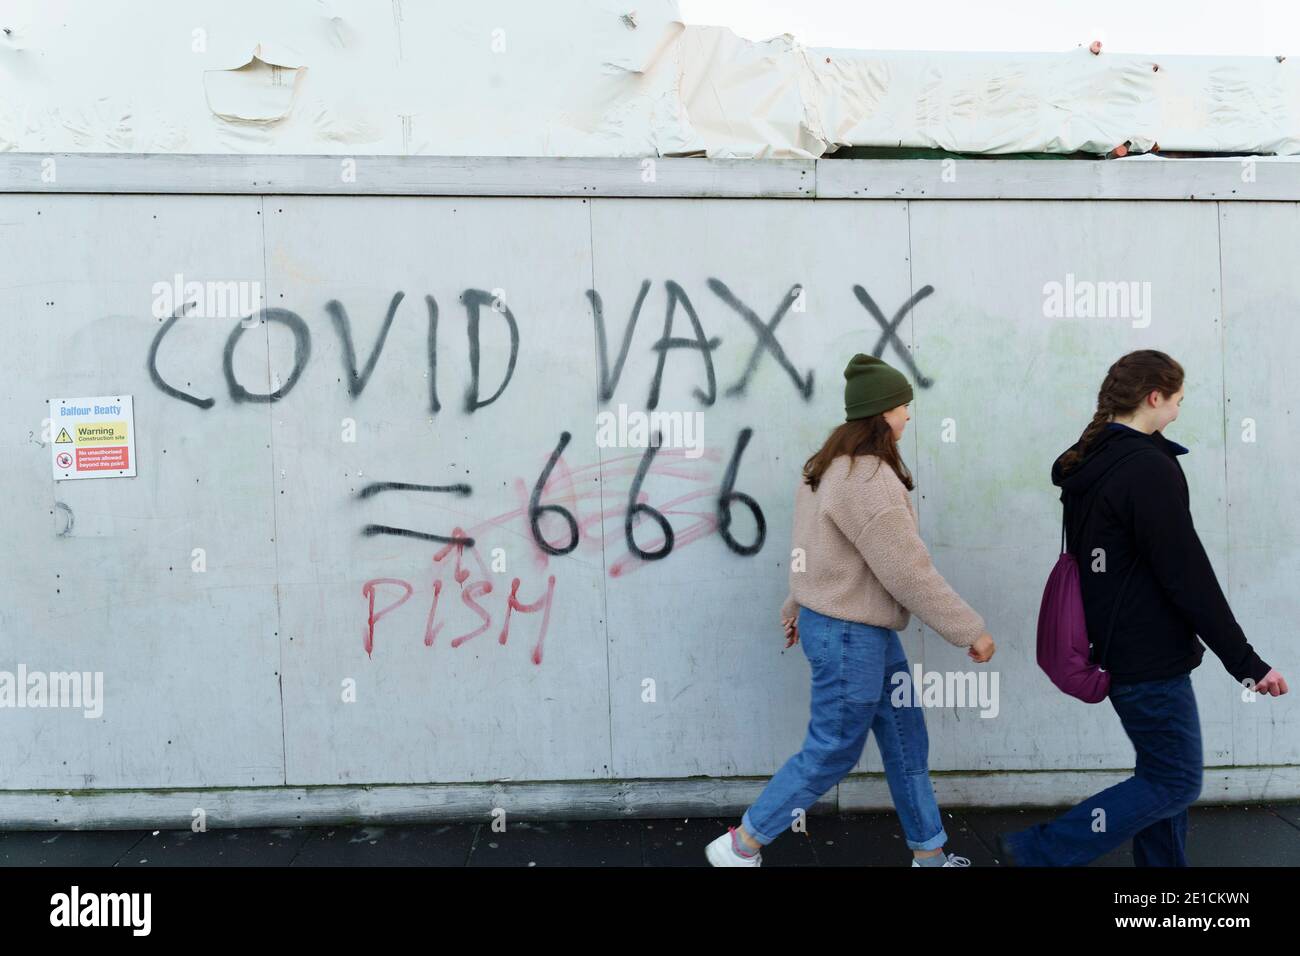 Edinburgh, Scotland, UK. 6 January 2021. Second day of national lockdown and streets fairly busy with members of the public . Much busier than previous national lockdown in 2020. Pic; Anti vaccination graffiti on billboard.  Iain Masterton/Alamy Live News Stock Photo